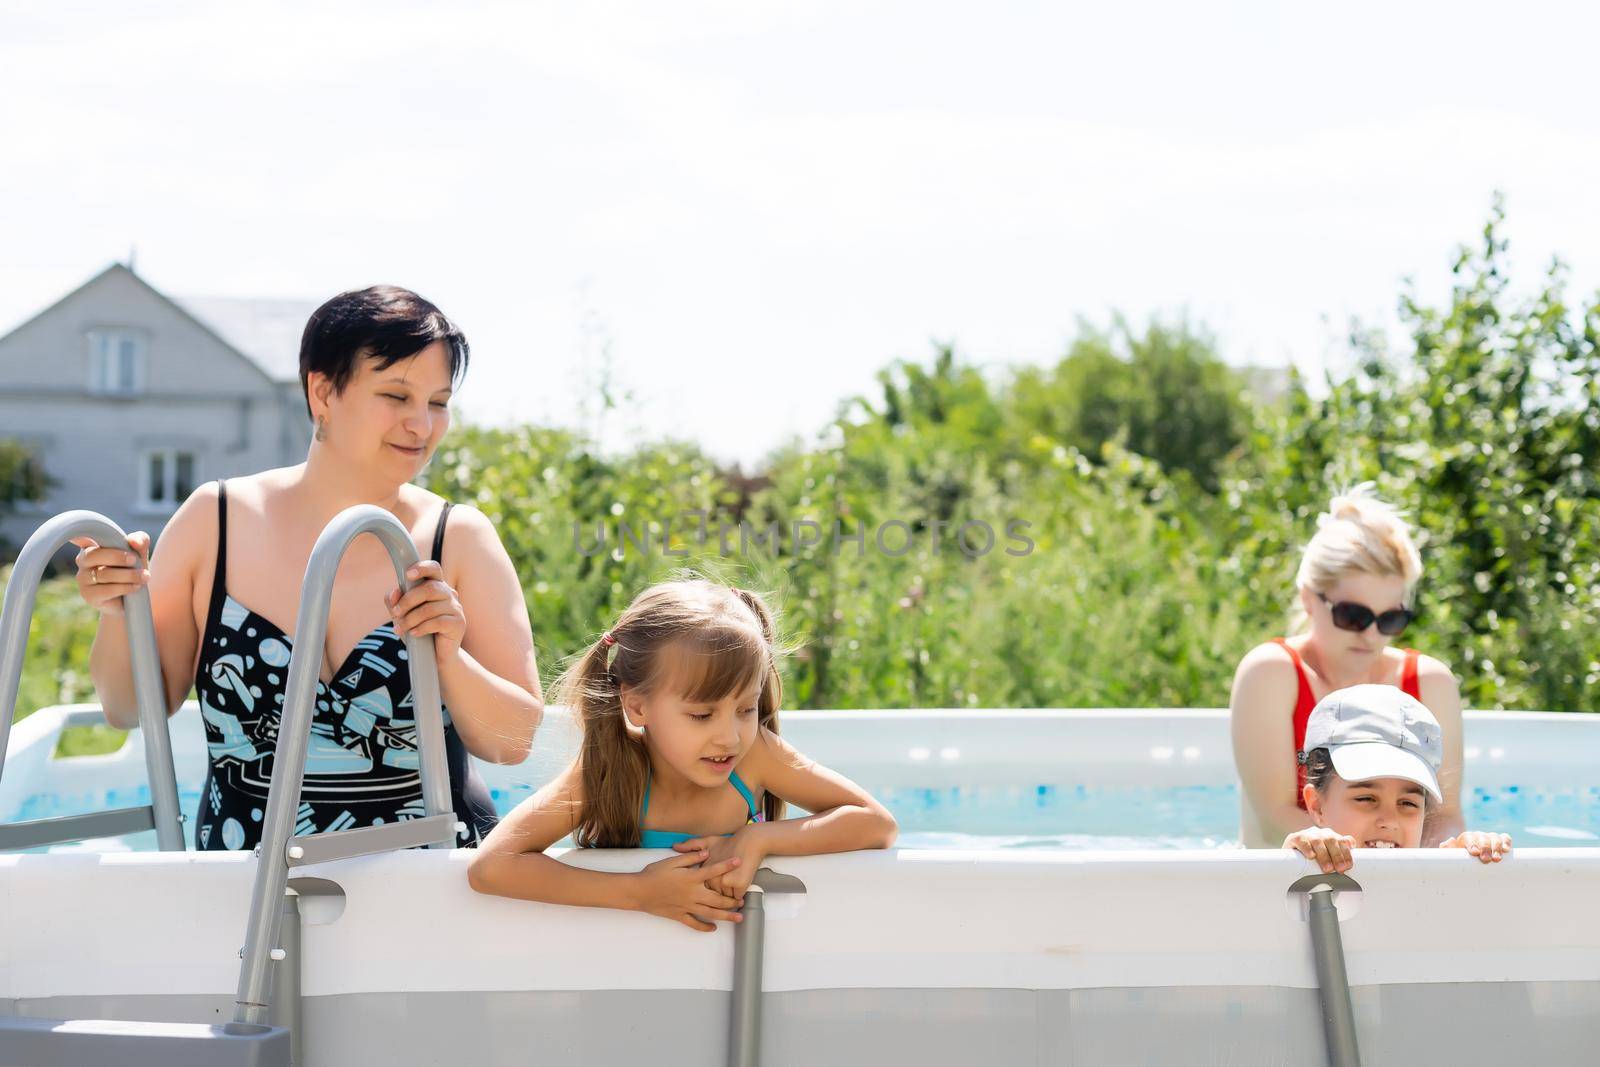 Mother and two daughters playing in pool water.Woman and two girls have fun in home pool splashing water and smiling by Andelov13